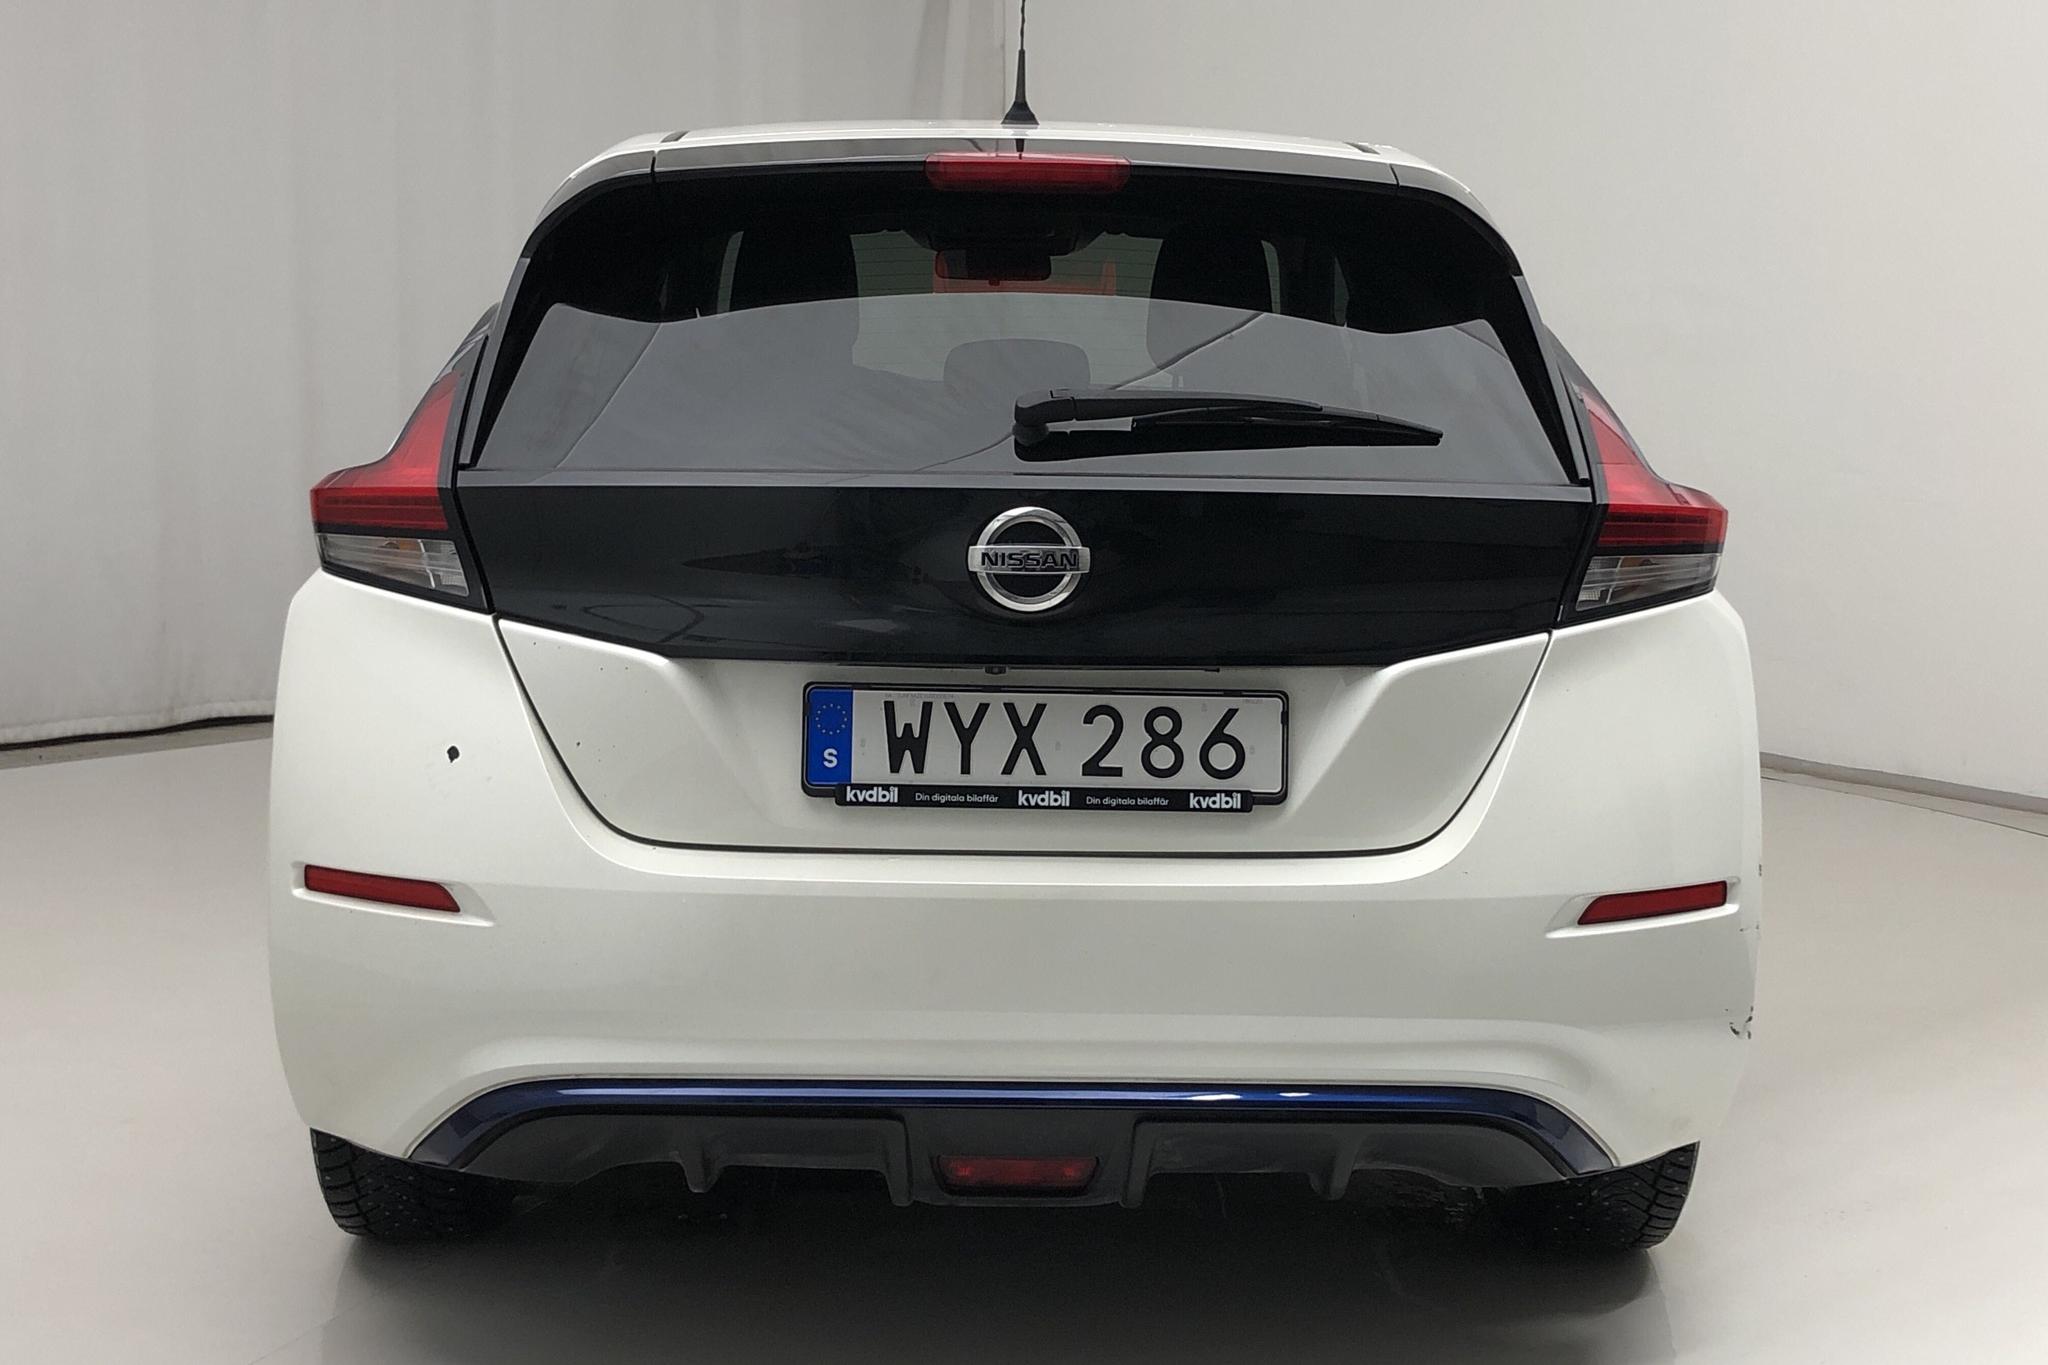 Nissan LEAF 5dr 39 kWh (150hk) - 29 520 km - Automatic - white - 2018